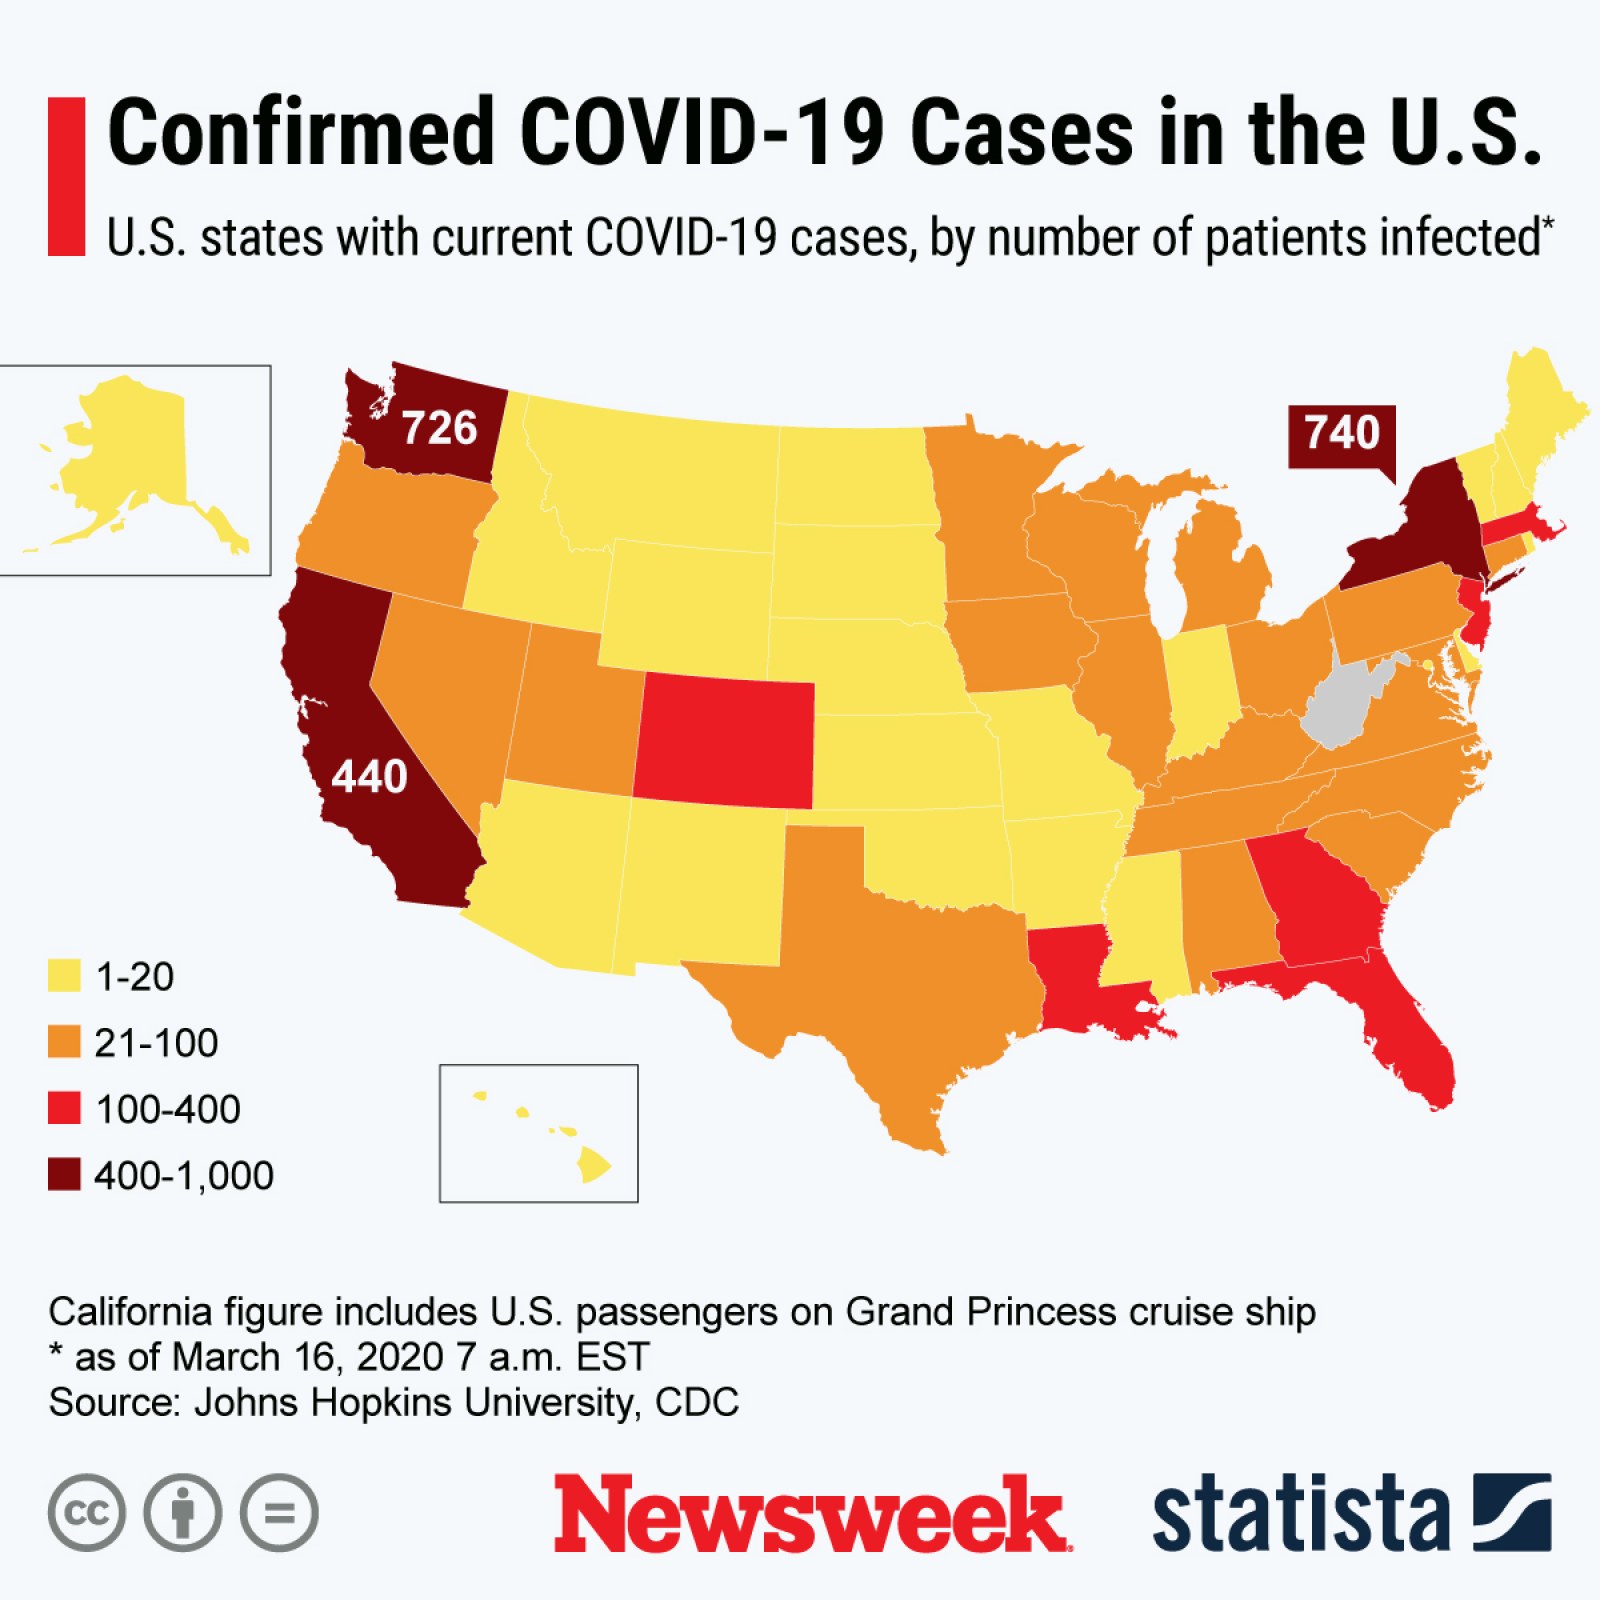 Cdc Coronavirus Advice For Keeping Restaurants Commercial Venues Safe From Covid 19